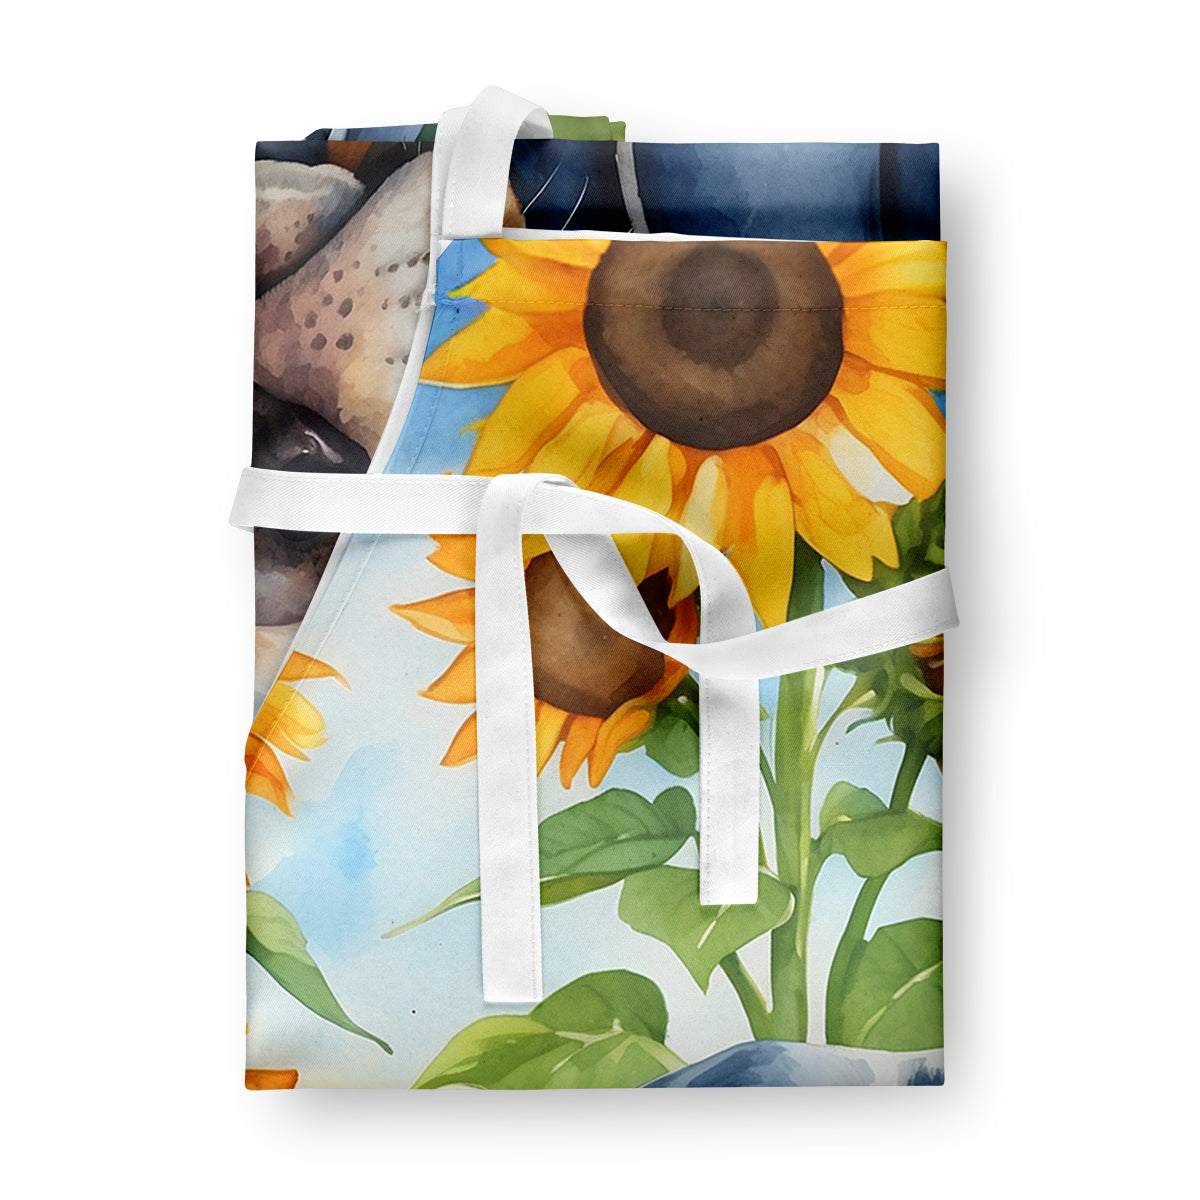 Bluetick Coonhound in Sunflowers Apron